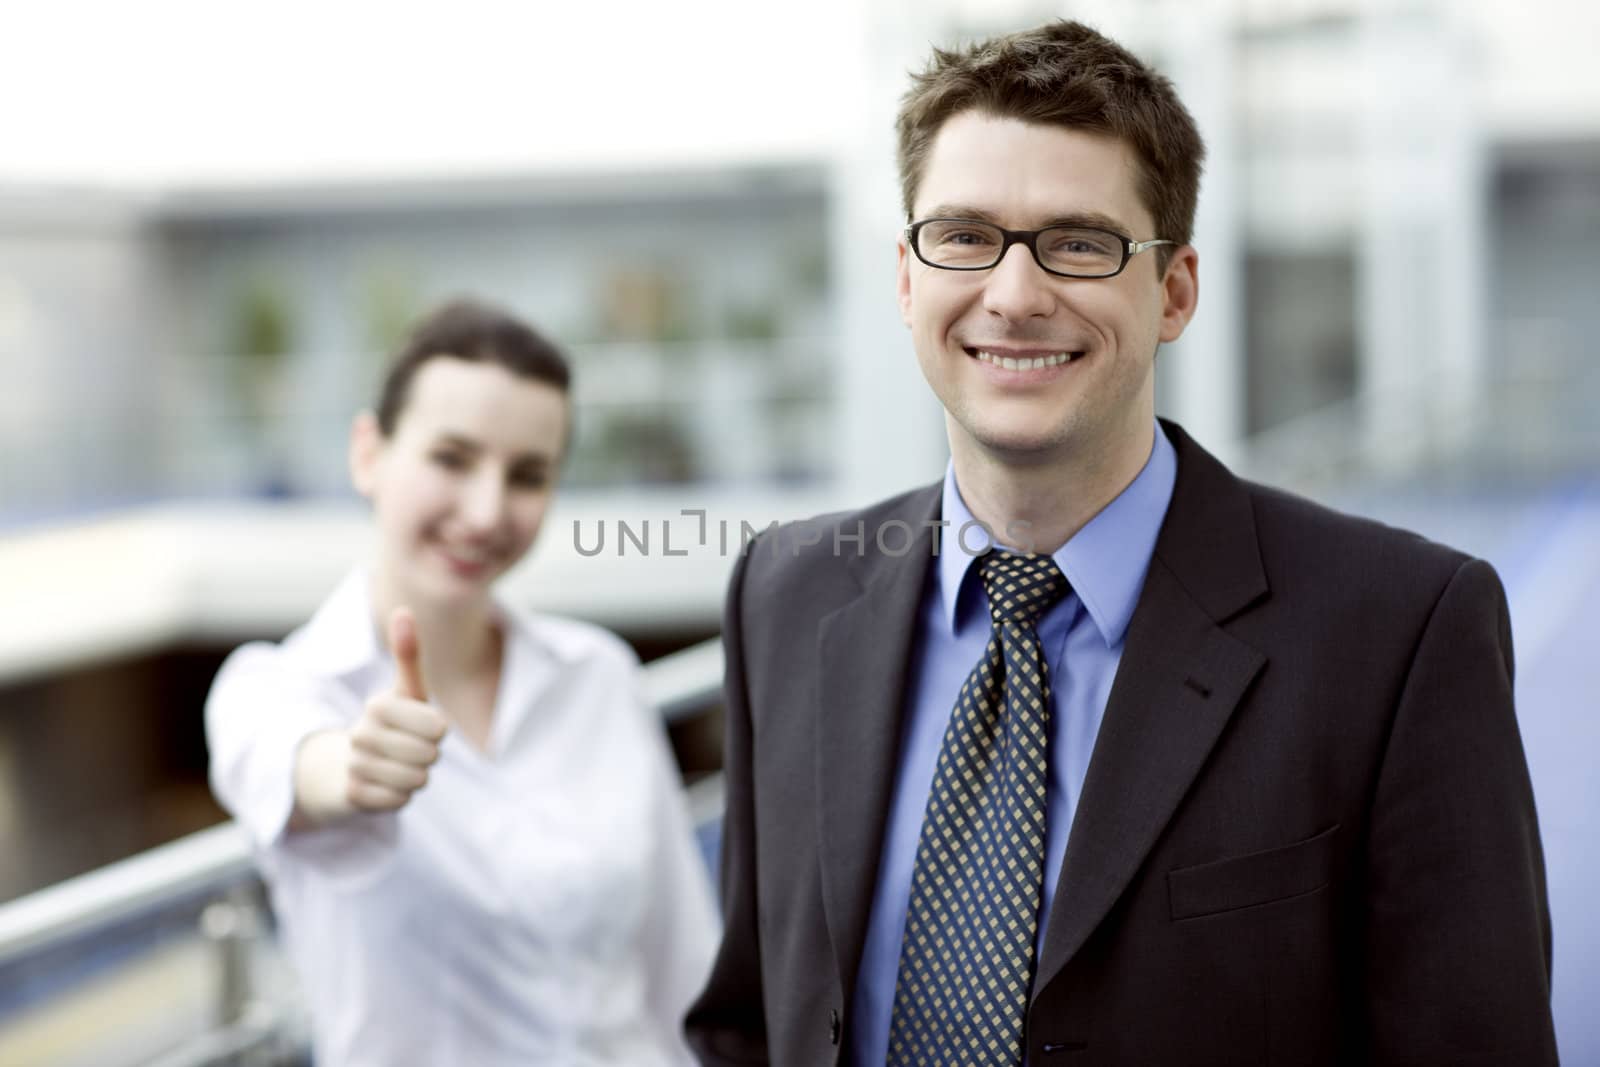 Business portrait - young handsom man with thumbs up sign in backgroud